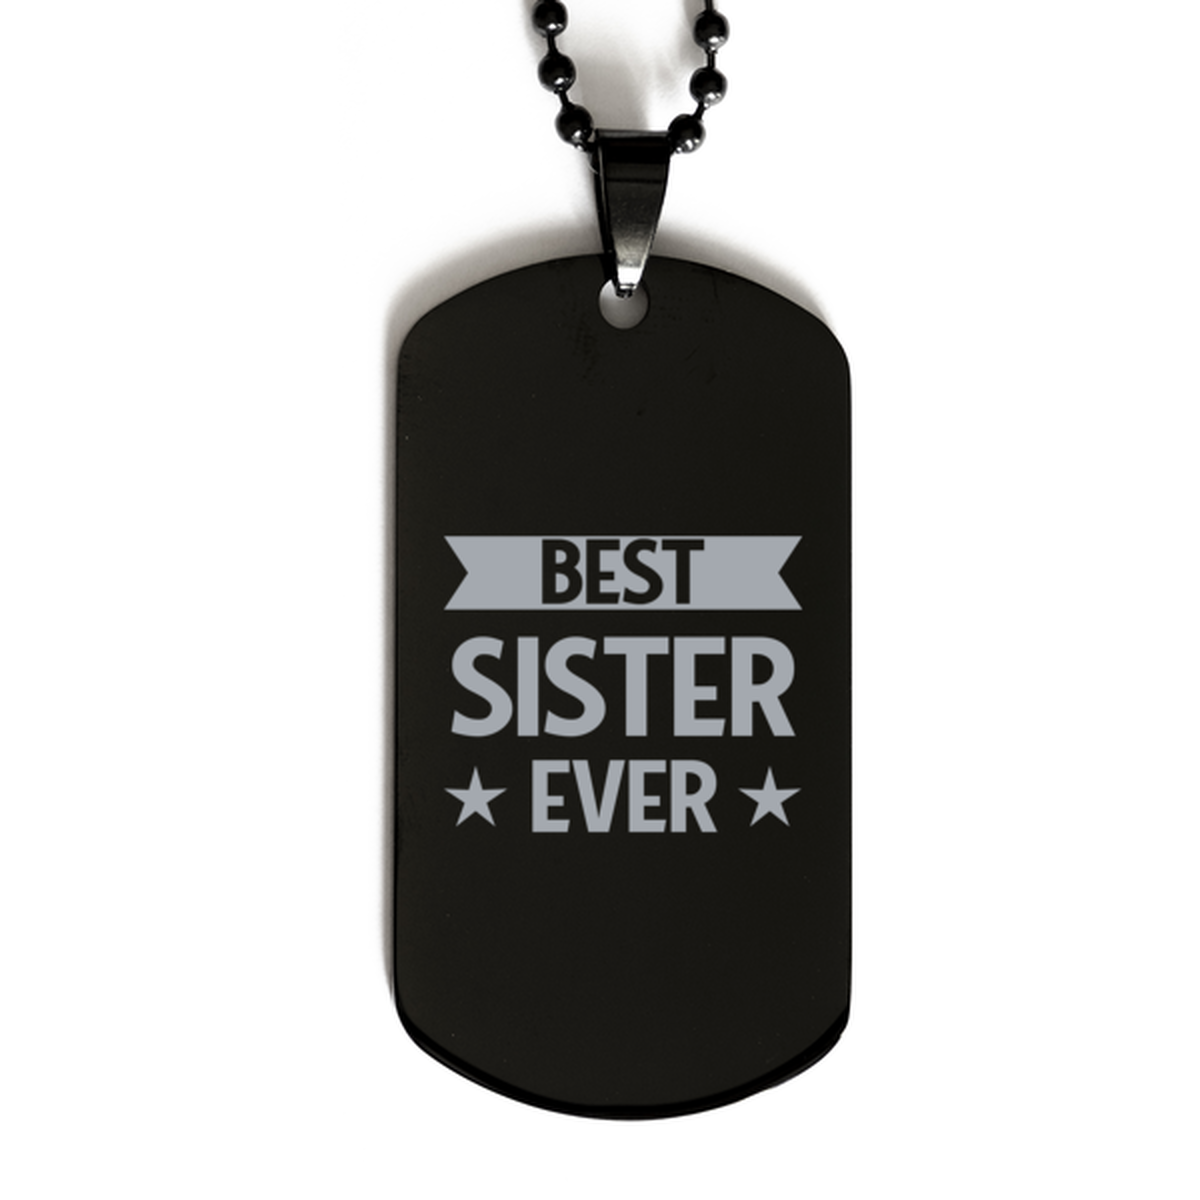 Best Sister Ever Sister Gifts, Funny Black Dog Tag For Sister, Birthday Family Presents Engraved Necklace For Women